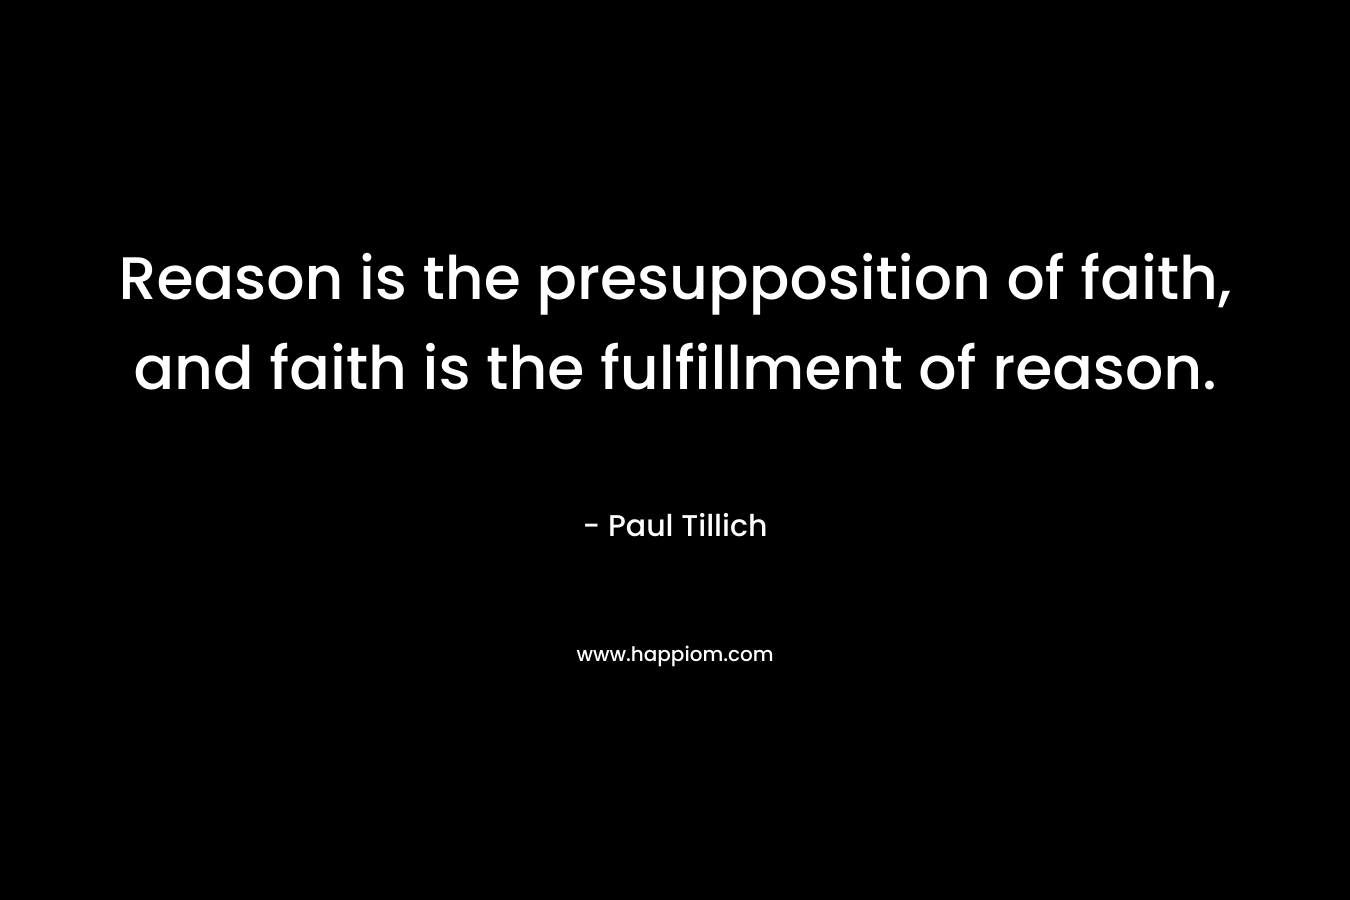 Reason is the presupposition of faith, and faith is the fulfillment of reason. – Paul Tillich